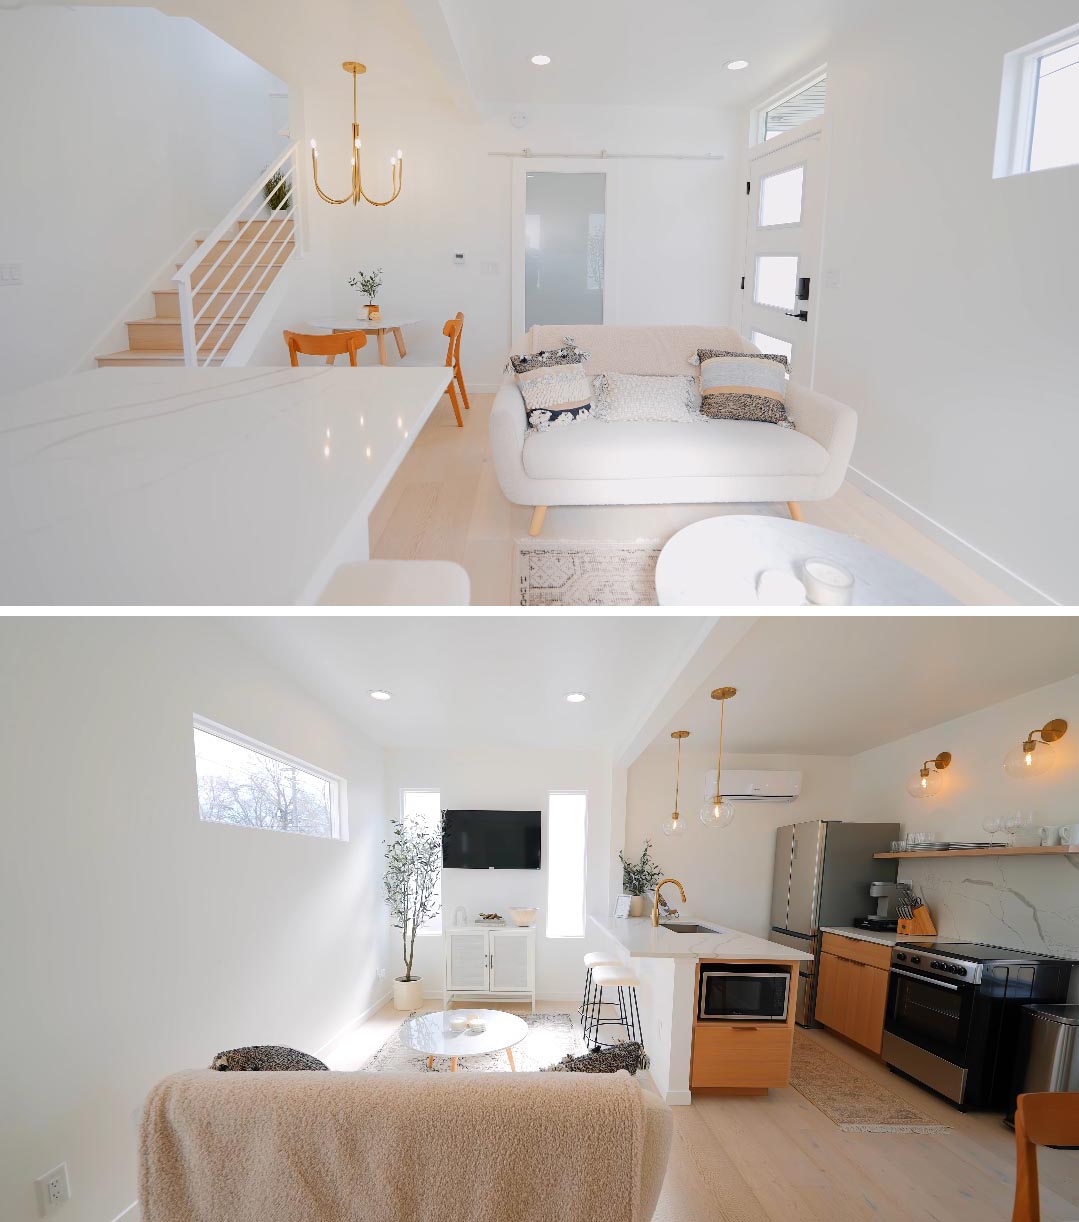 The interior of a modern tiny house made from shipping containers, is bright white with gold accents.